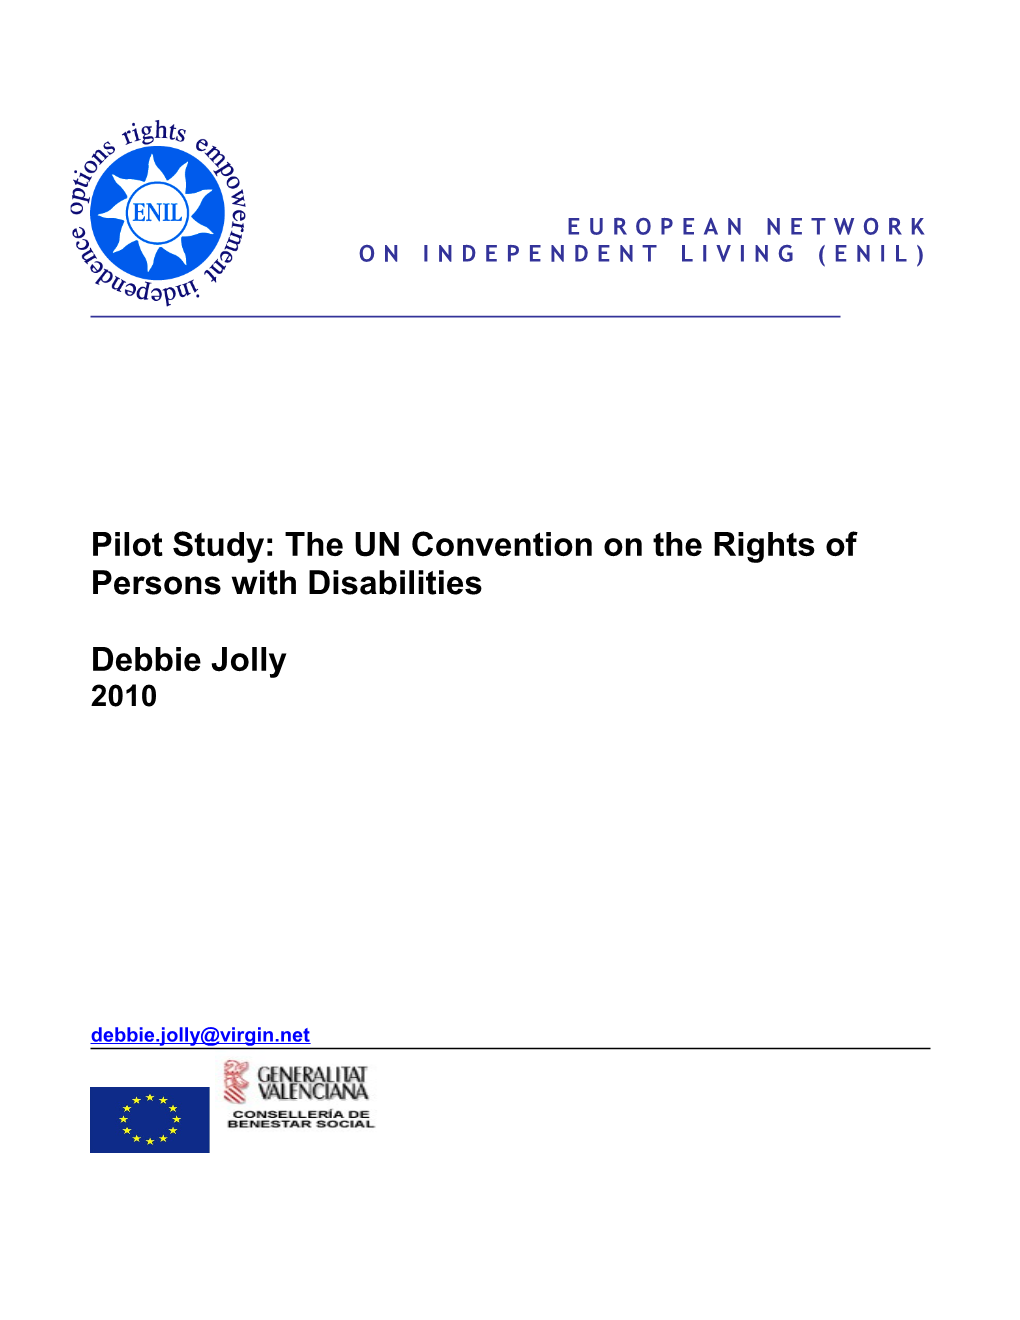 Pilot Study: the UN Convention on the Rights of Persons with Disabilities